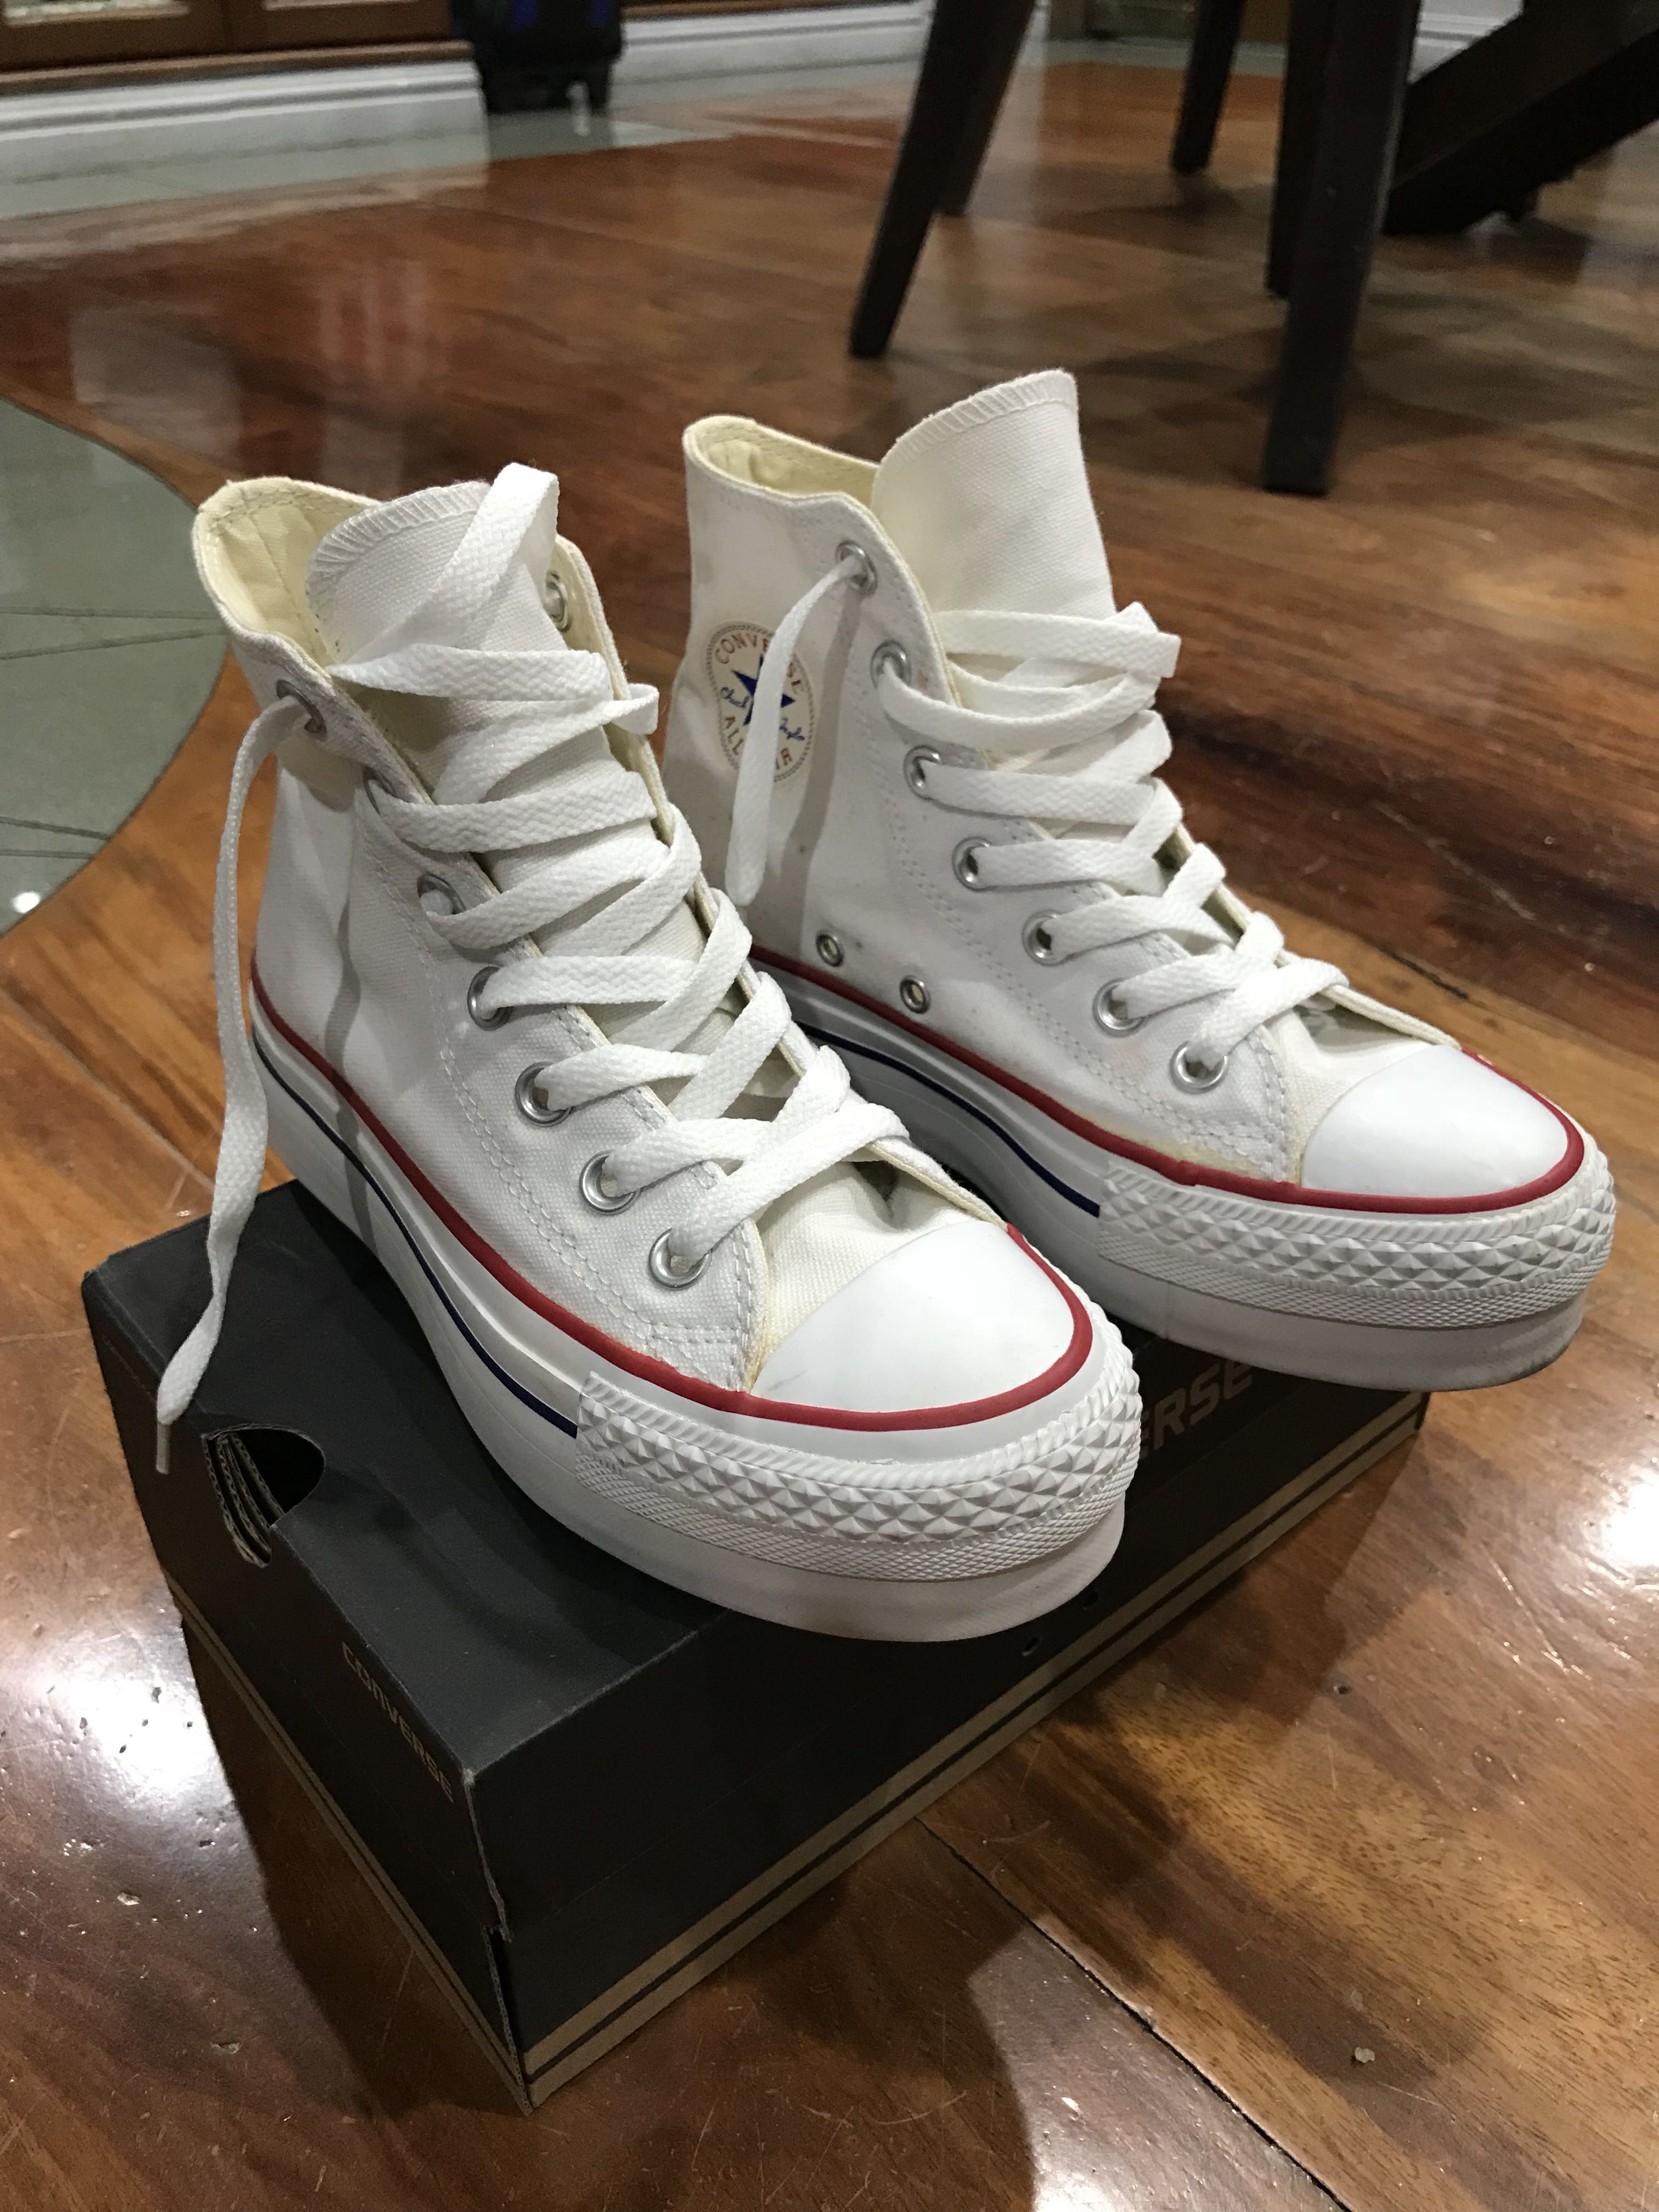 Converse High Cut Thick Sole Sneakers 